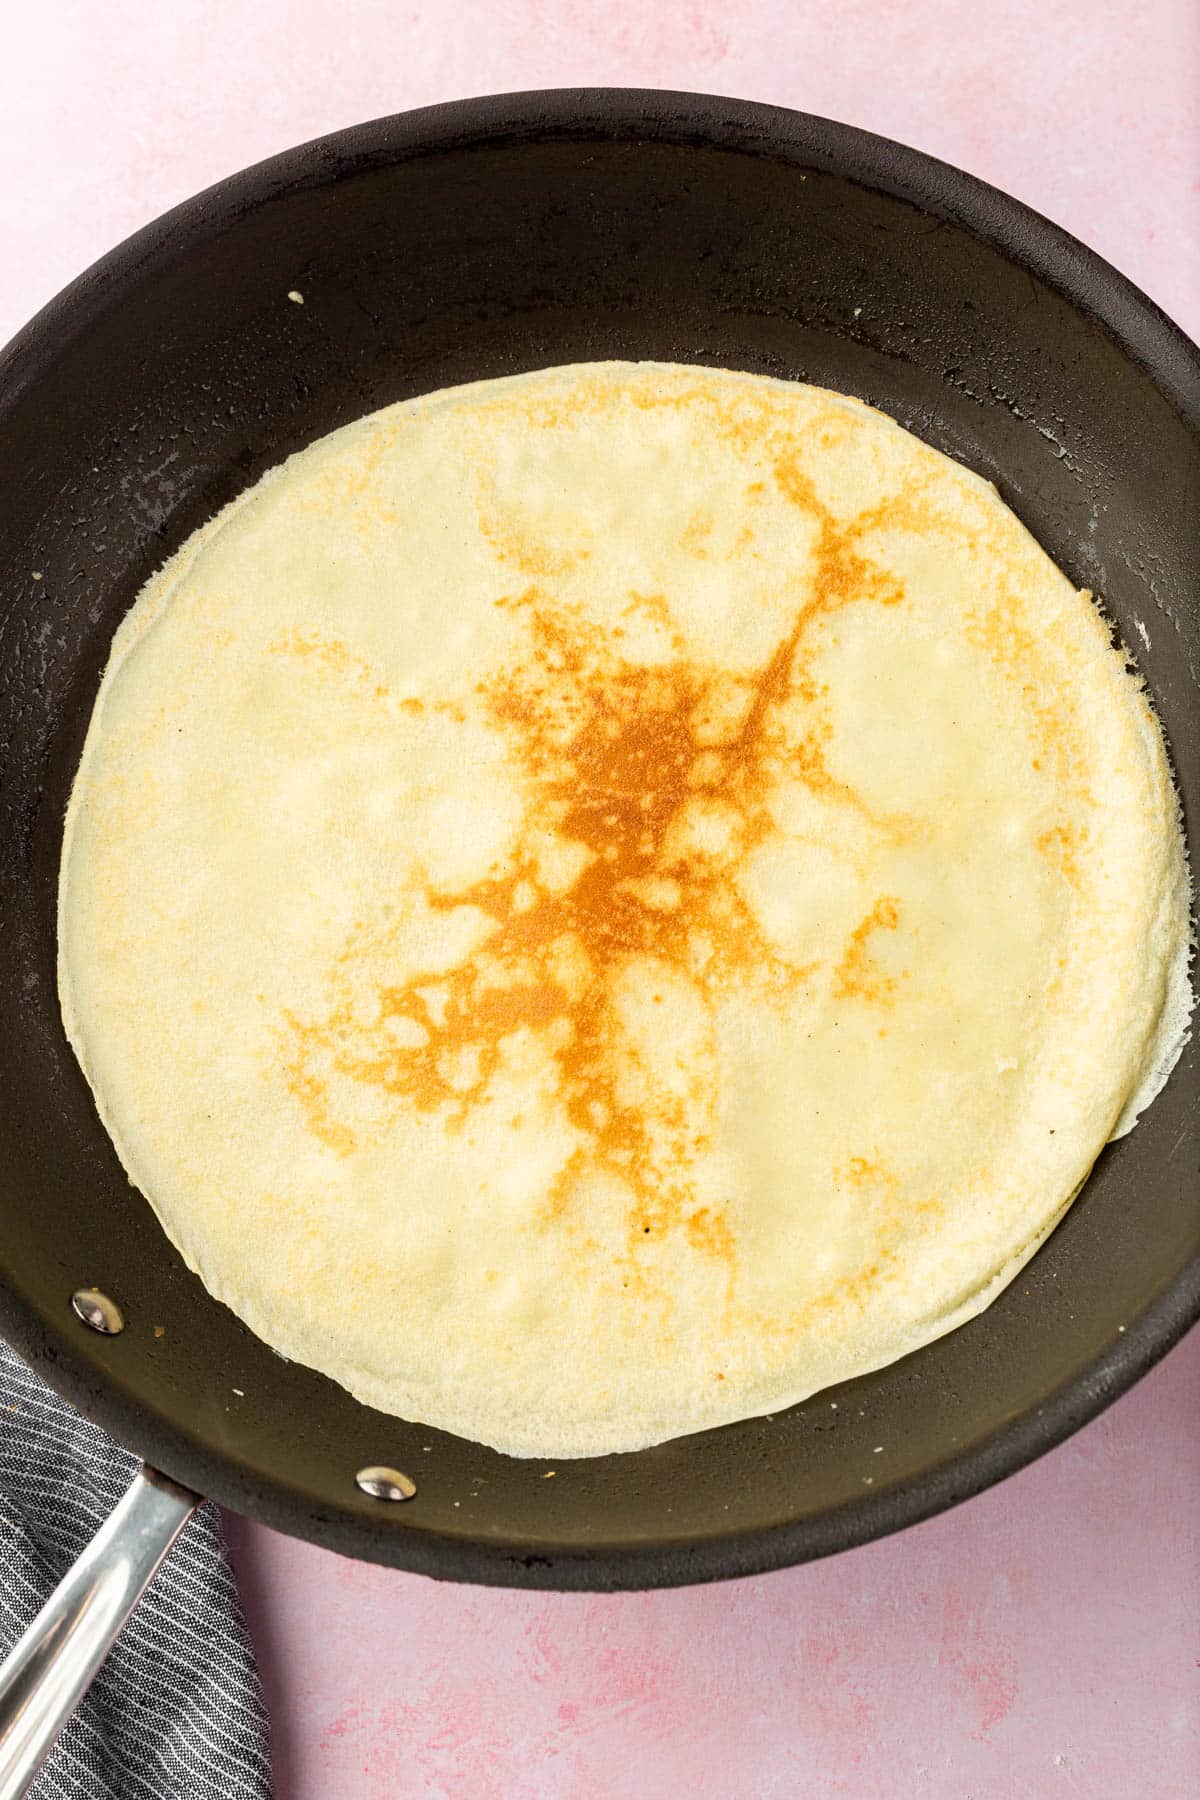 A gluten-free crepe cooking in a non-stick skillet.